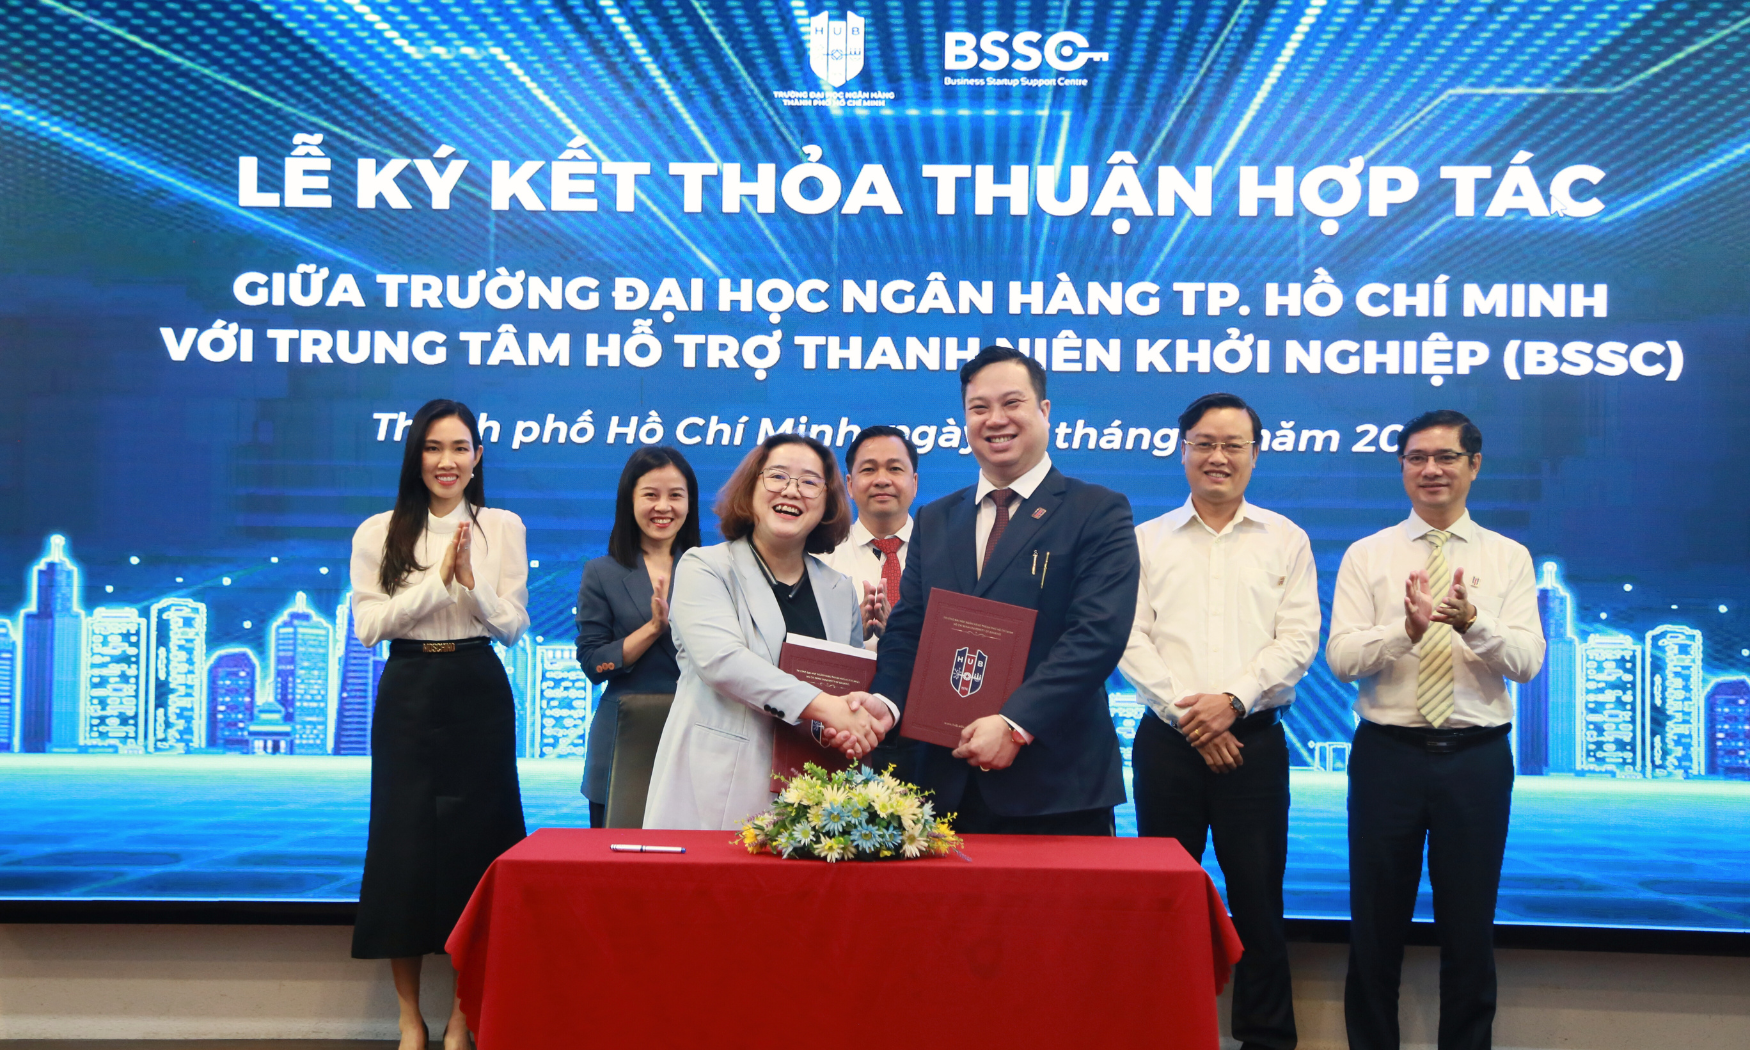 BSSC signs MOU with Ho Chi Minh University of Banking - HUB